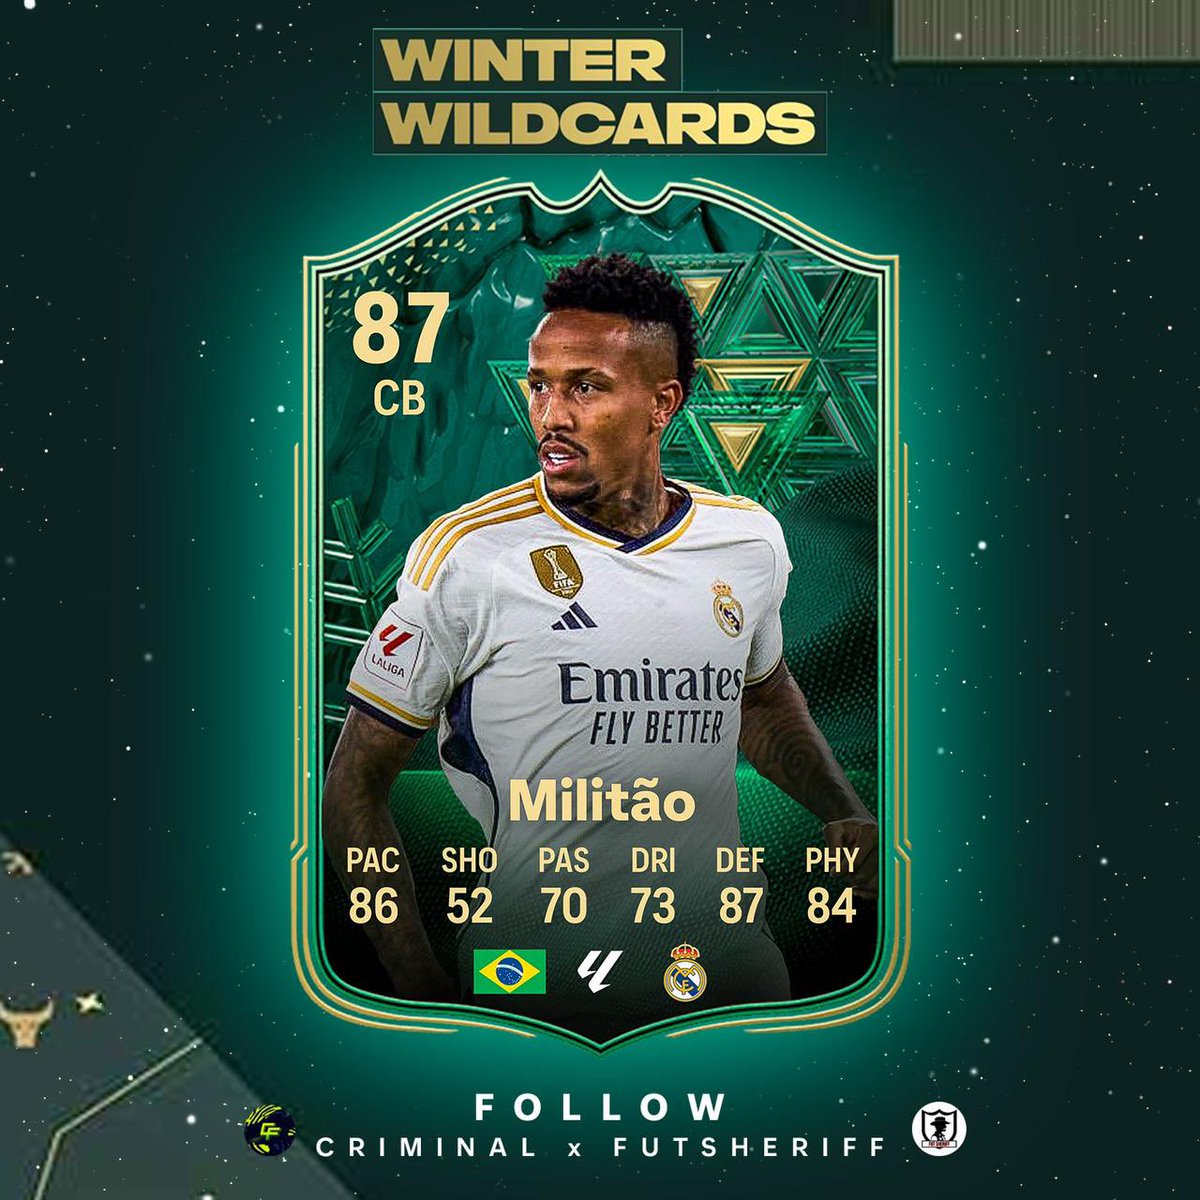 FUT Sheriff - 💥This should be the Mini-Release!🚀 Official STATS